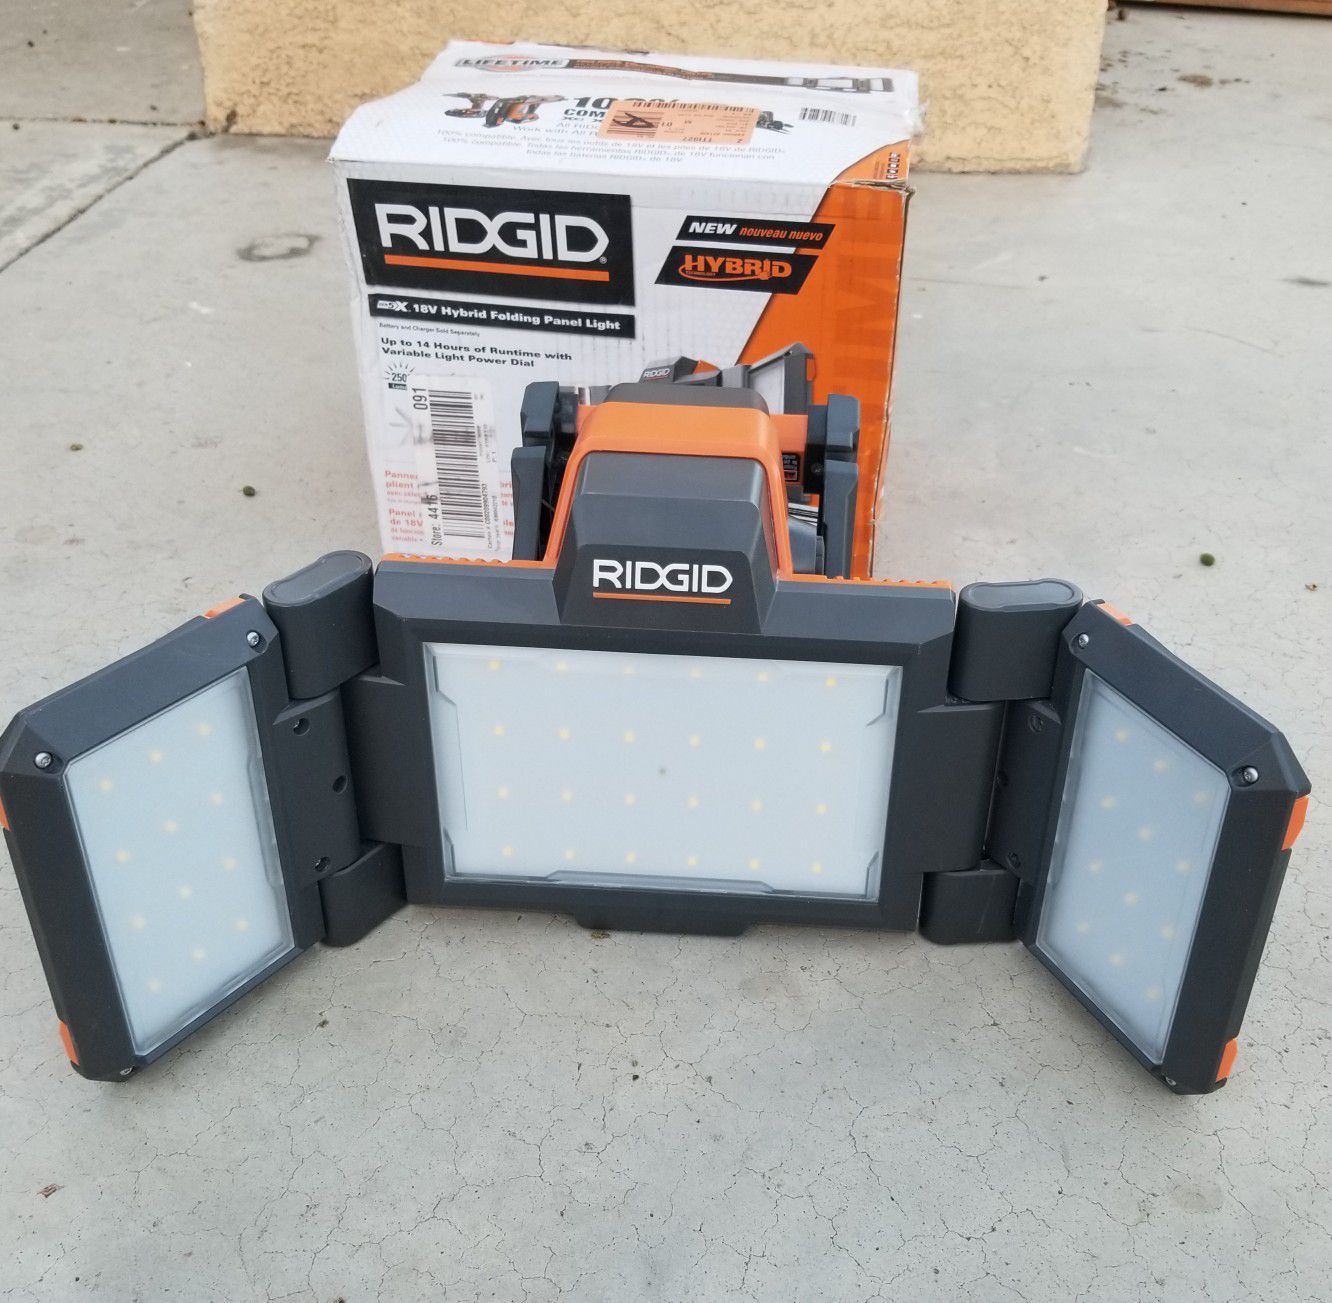 RIDGID 18-Volt Hybrid Folding Panel Light (Tool Only for Sale in Covina, CA  OfferUp